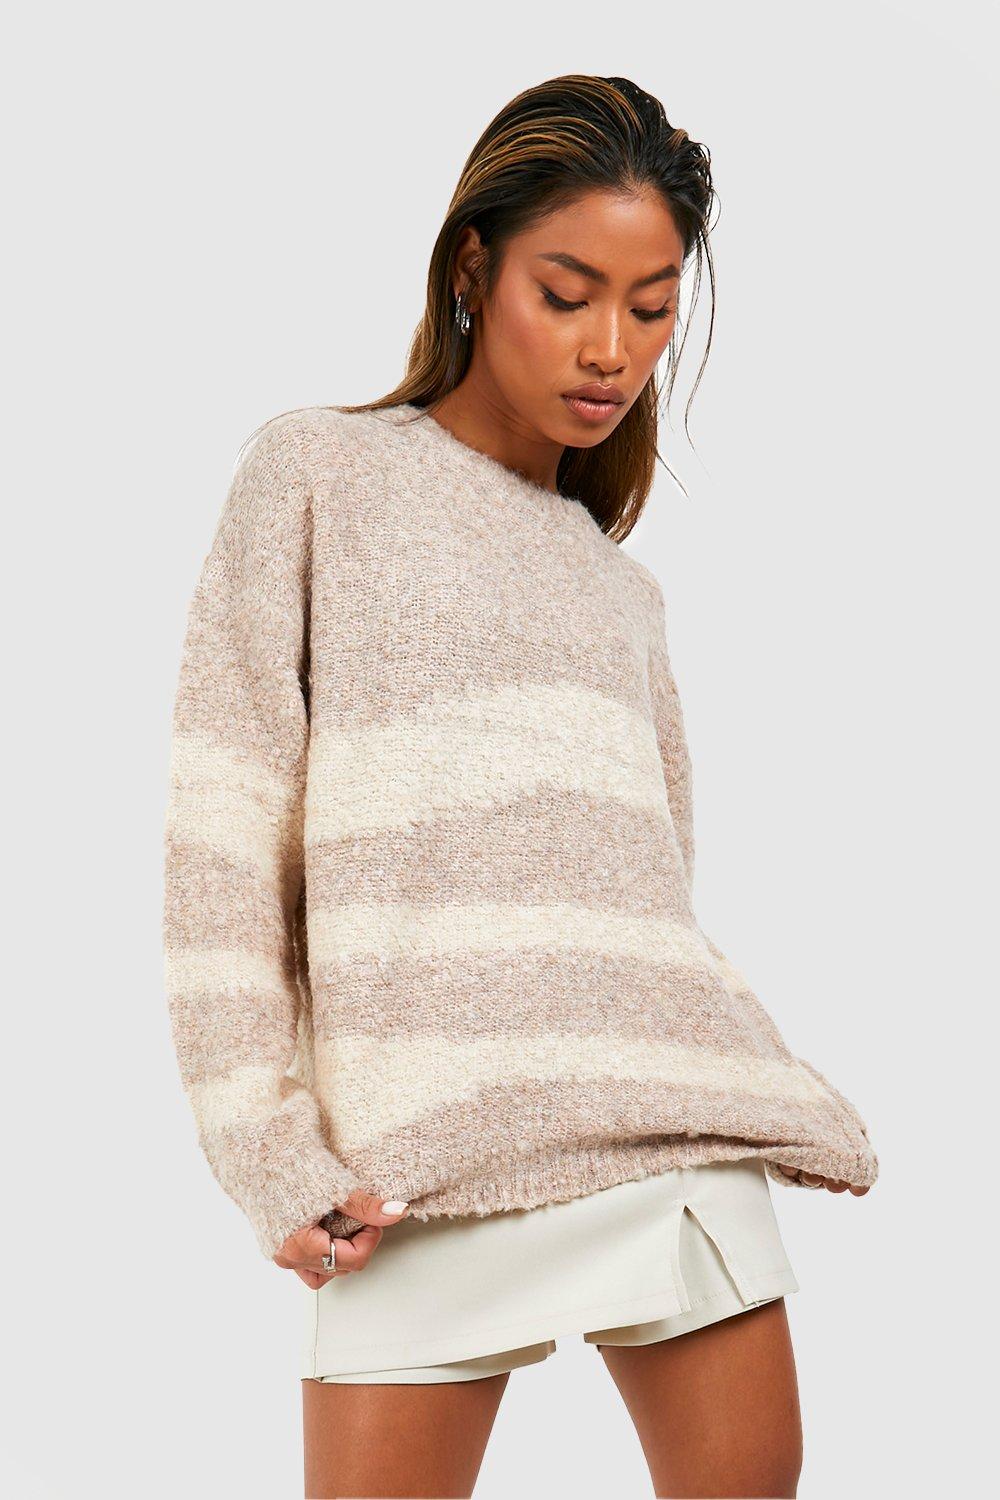 Soft Knit Abstract Stripe Overszied Jumper | boohoo